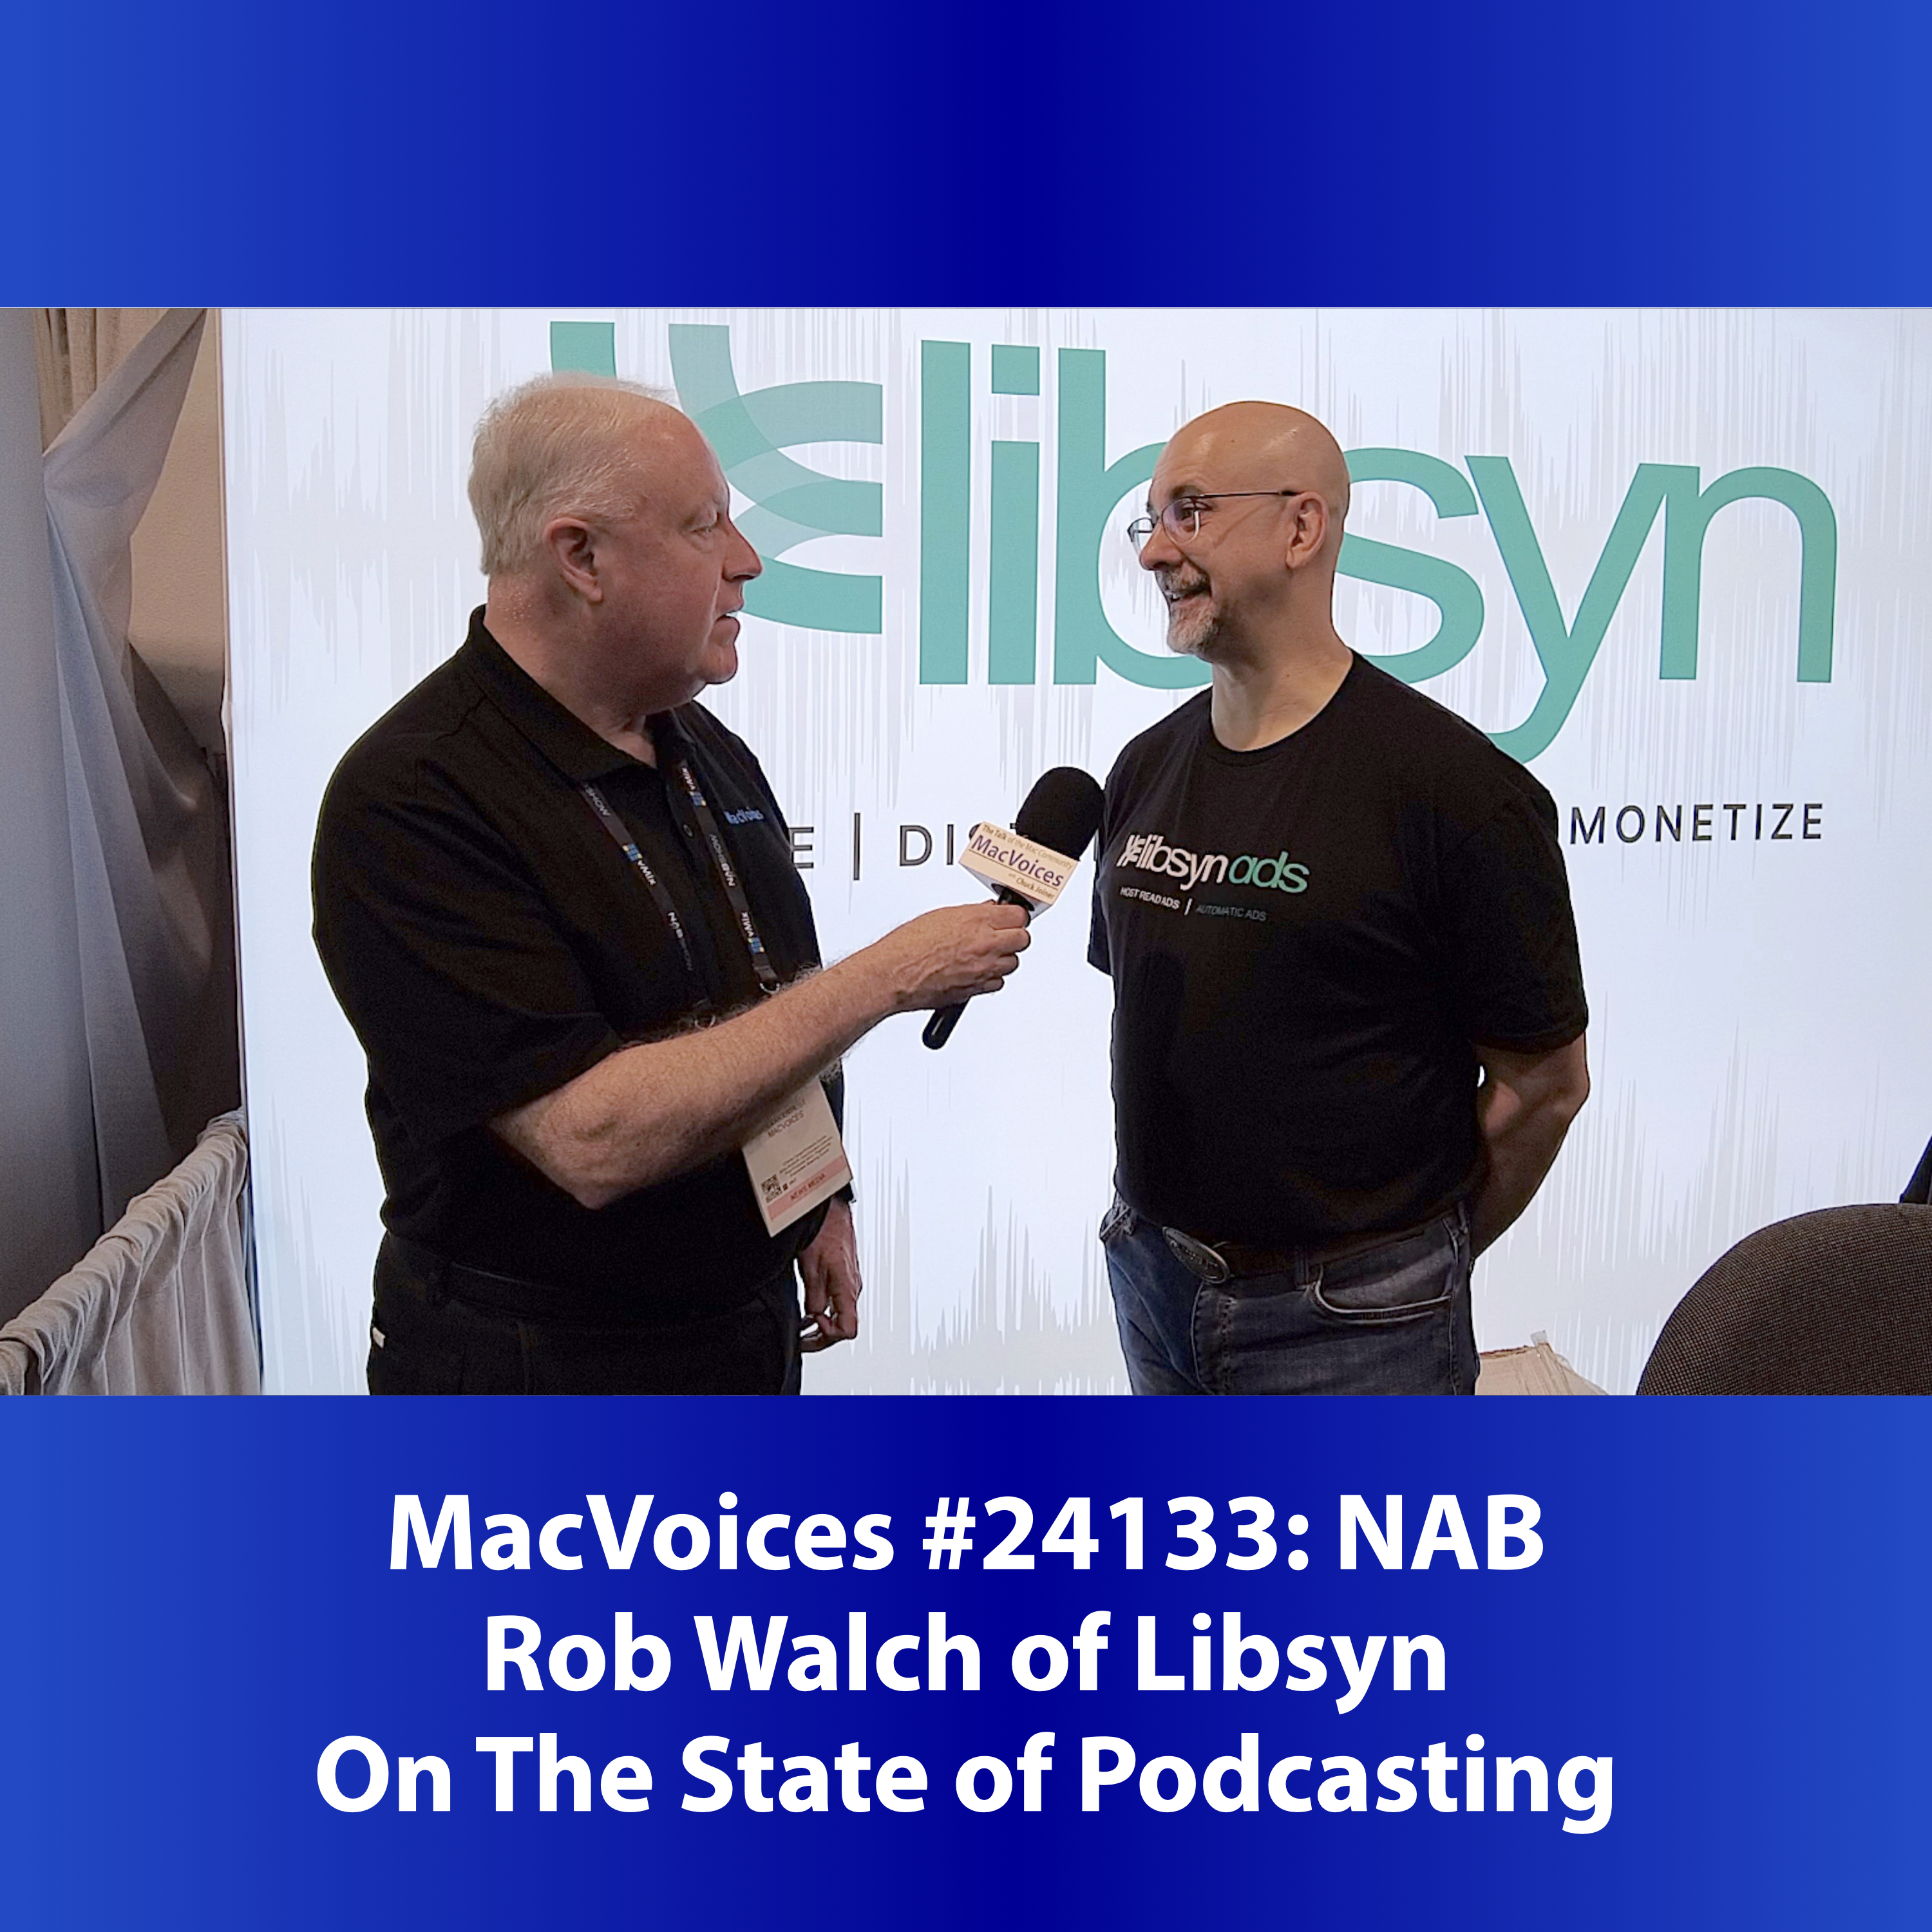 MacVoices #24133: NAB - Rob Walch of Libsyn On The State of Podcasting